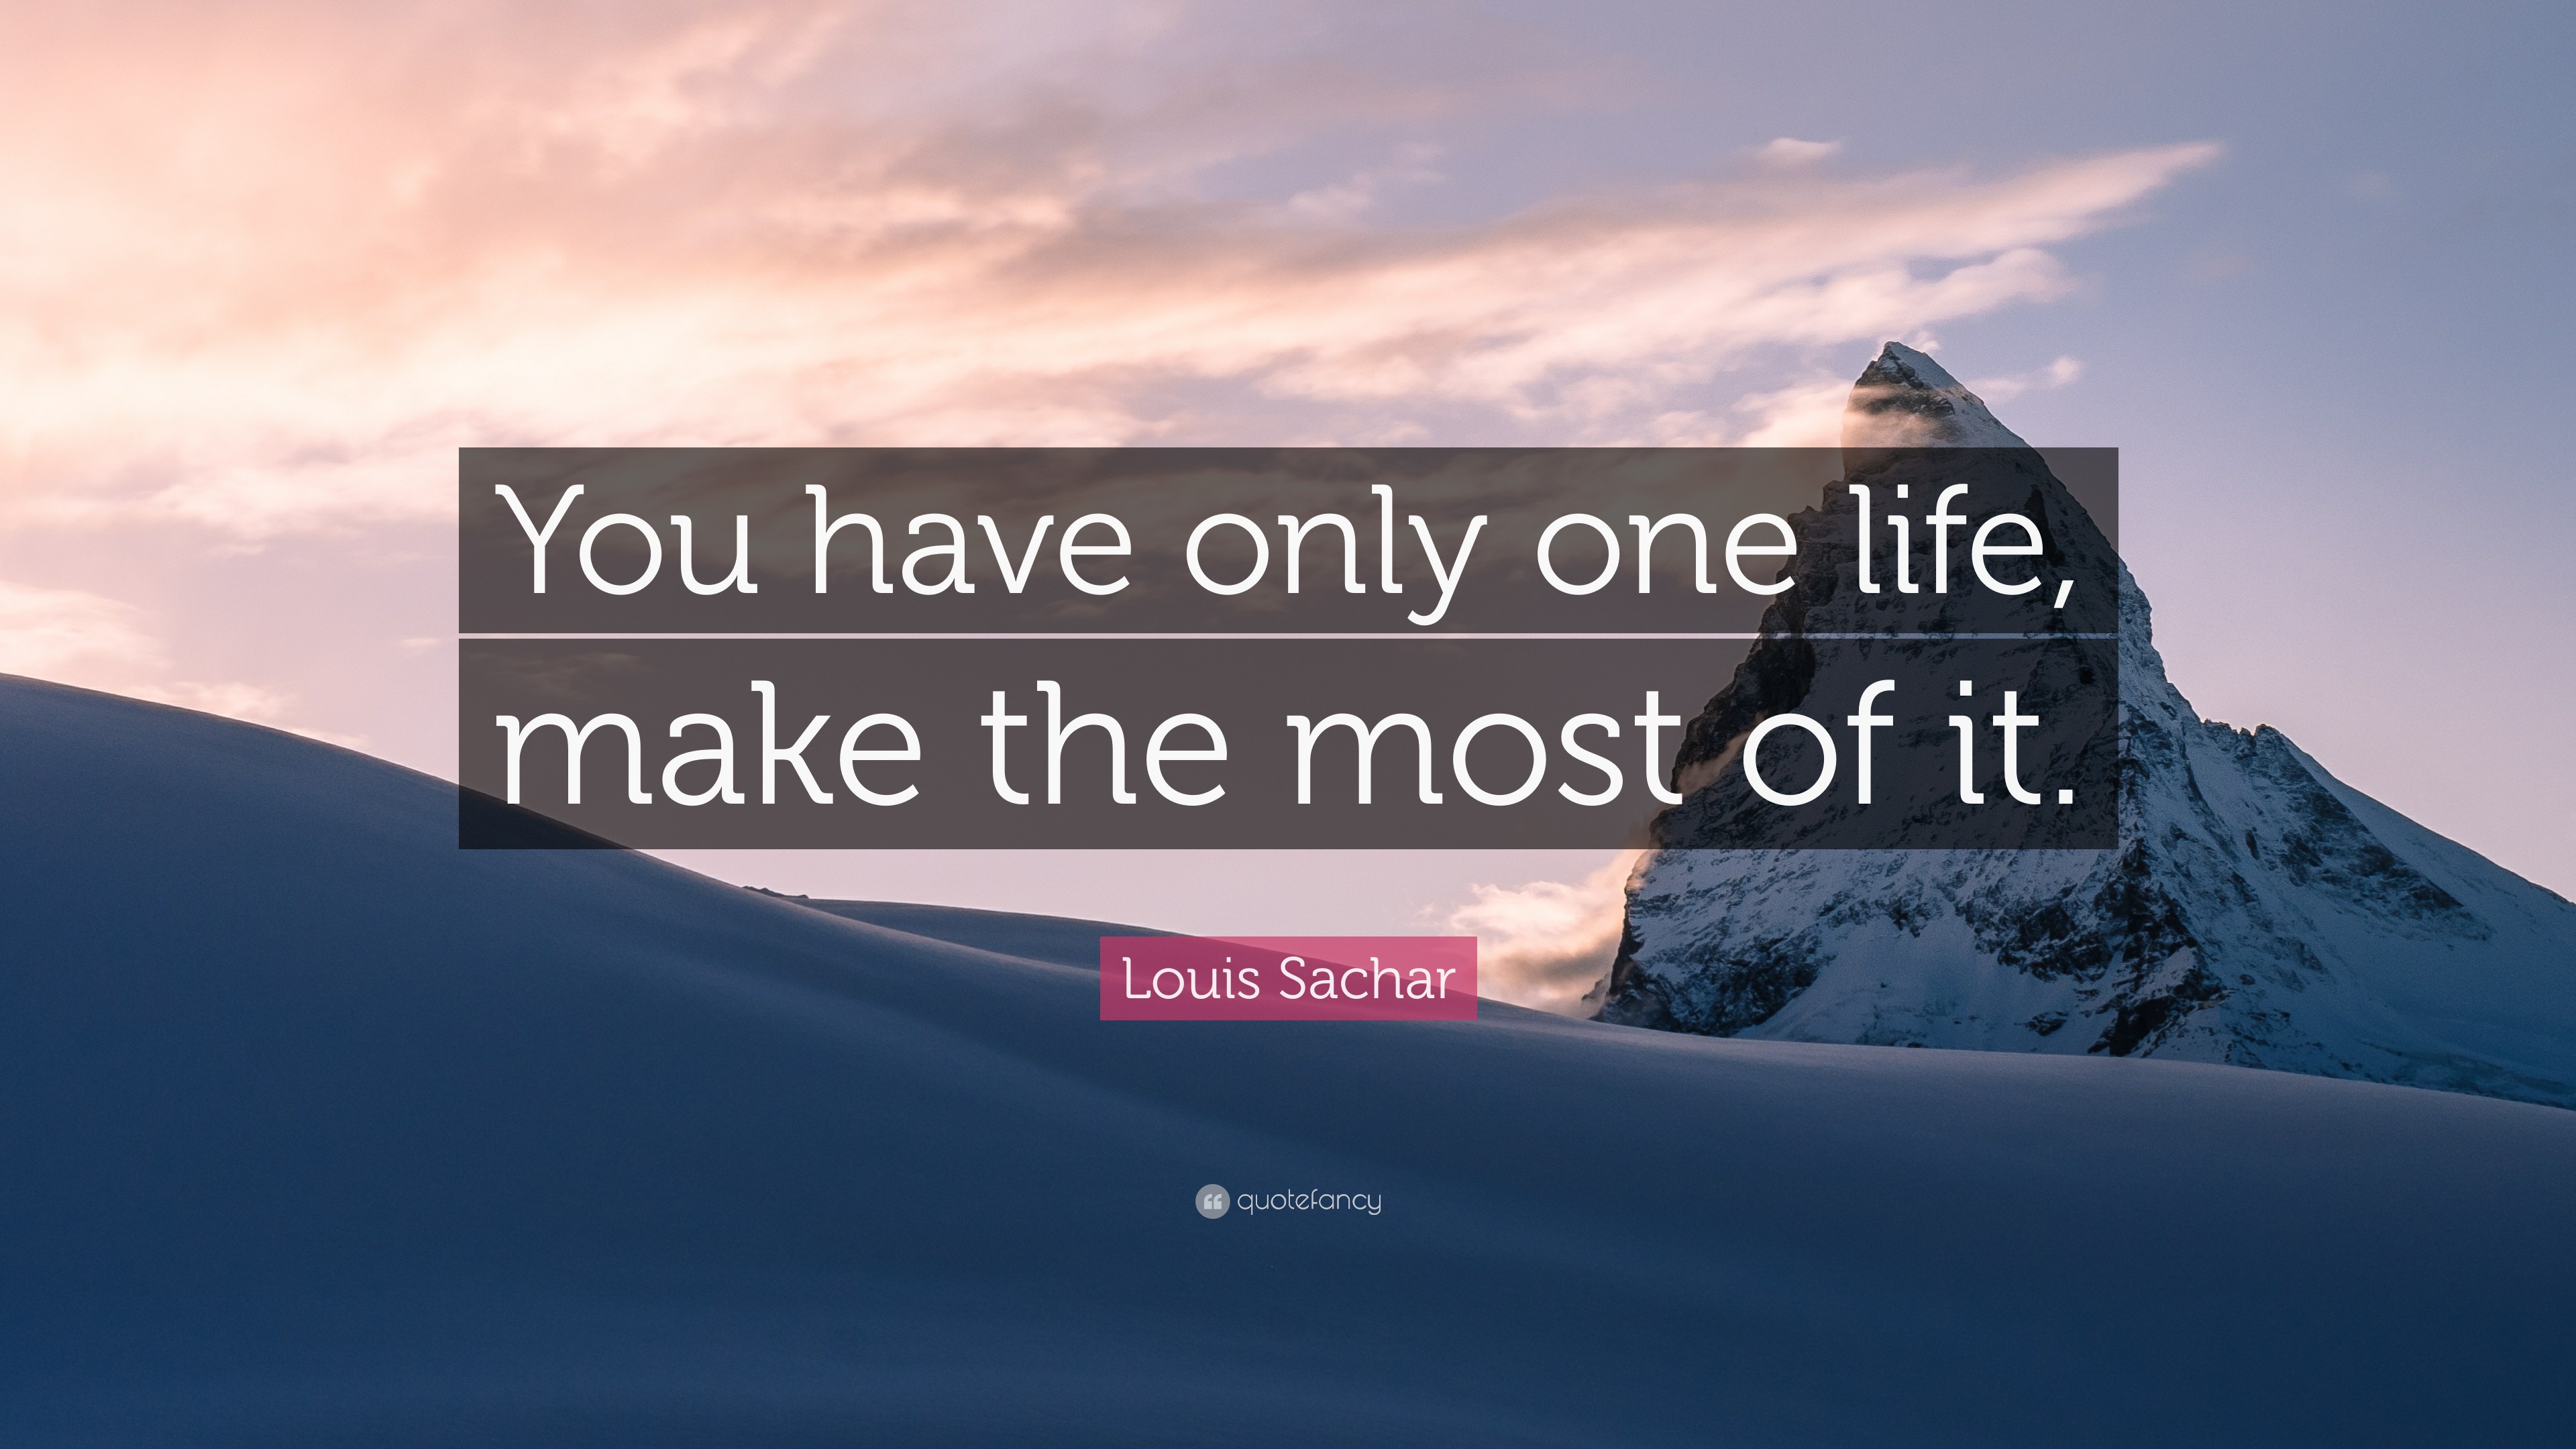 Louis Sachar Quote: “You have only one life, make the most of it.”